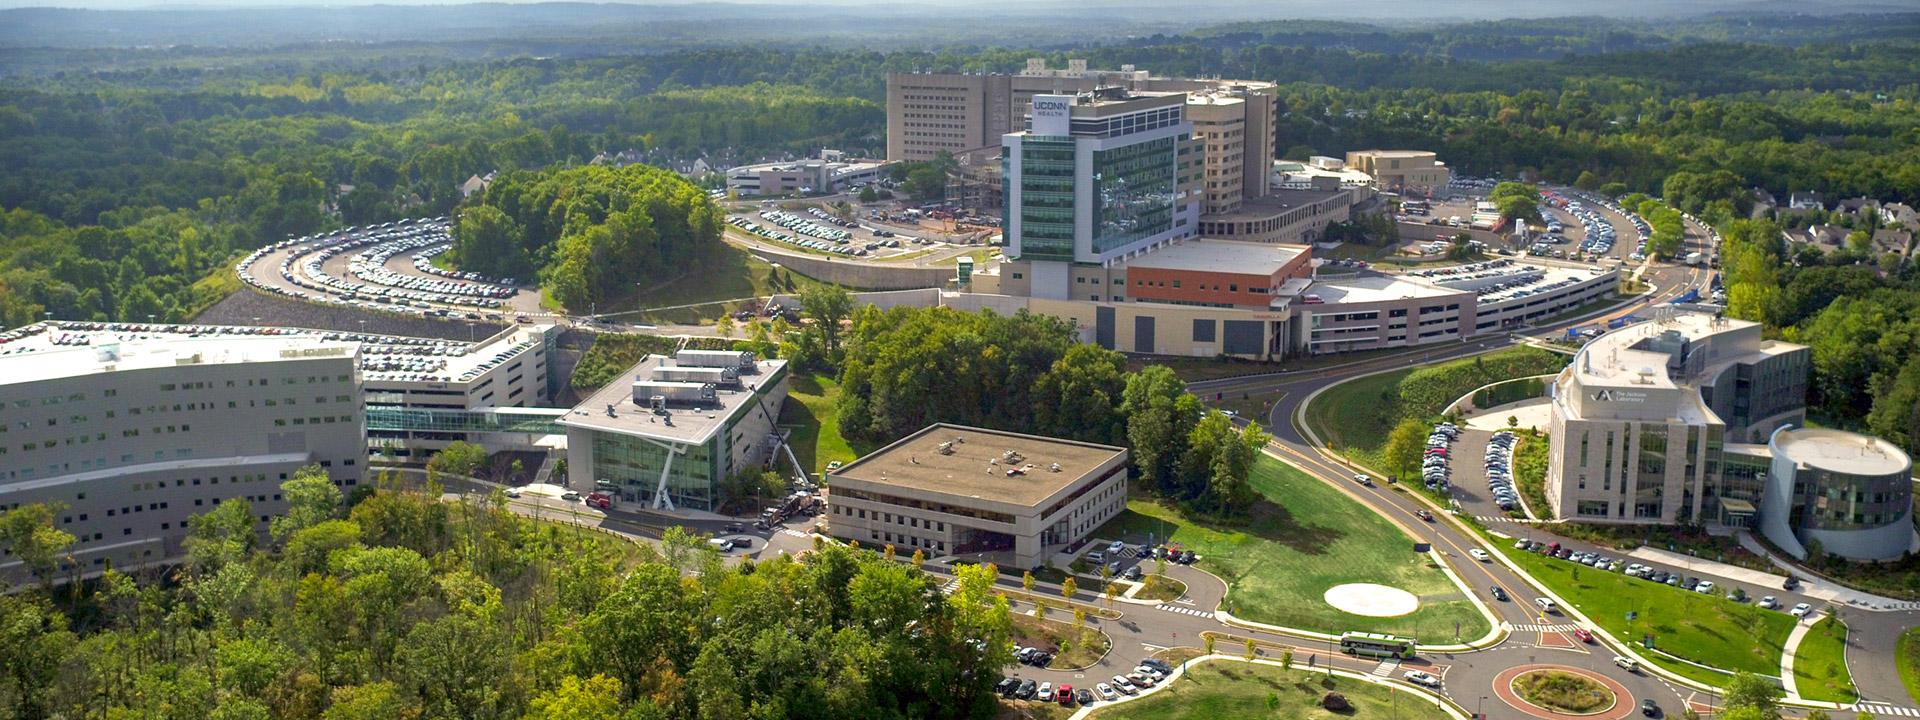 Aerial view of the UConn Health campus